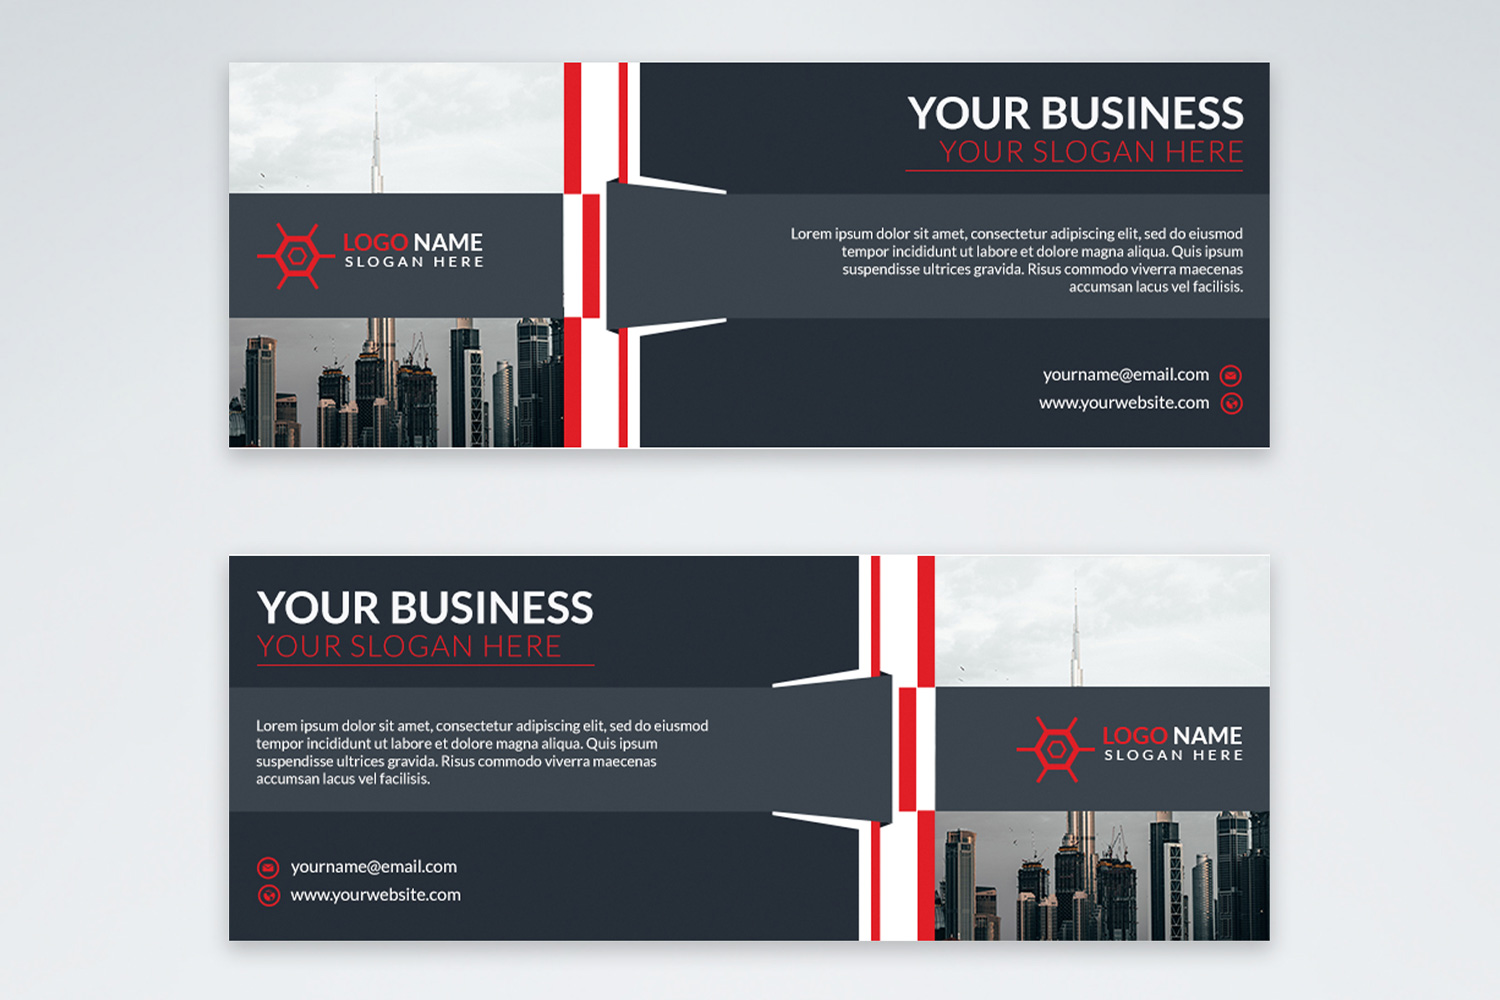 Professional Facebook Cover Design Template with red color.